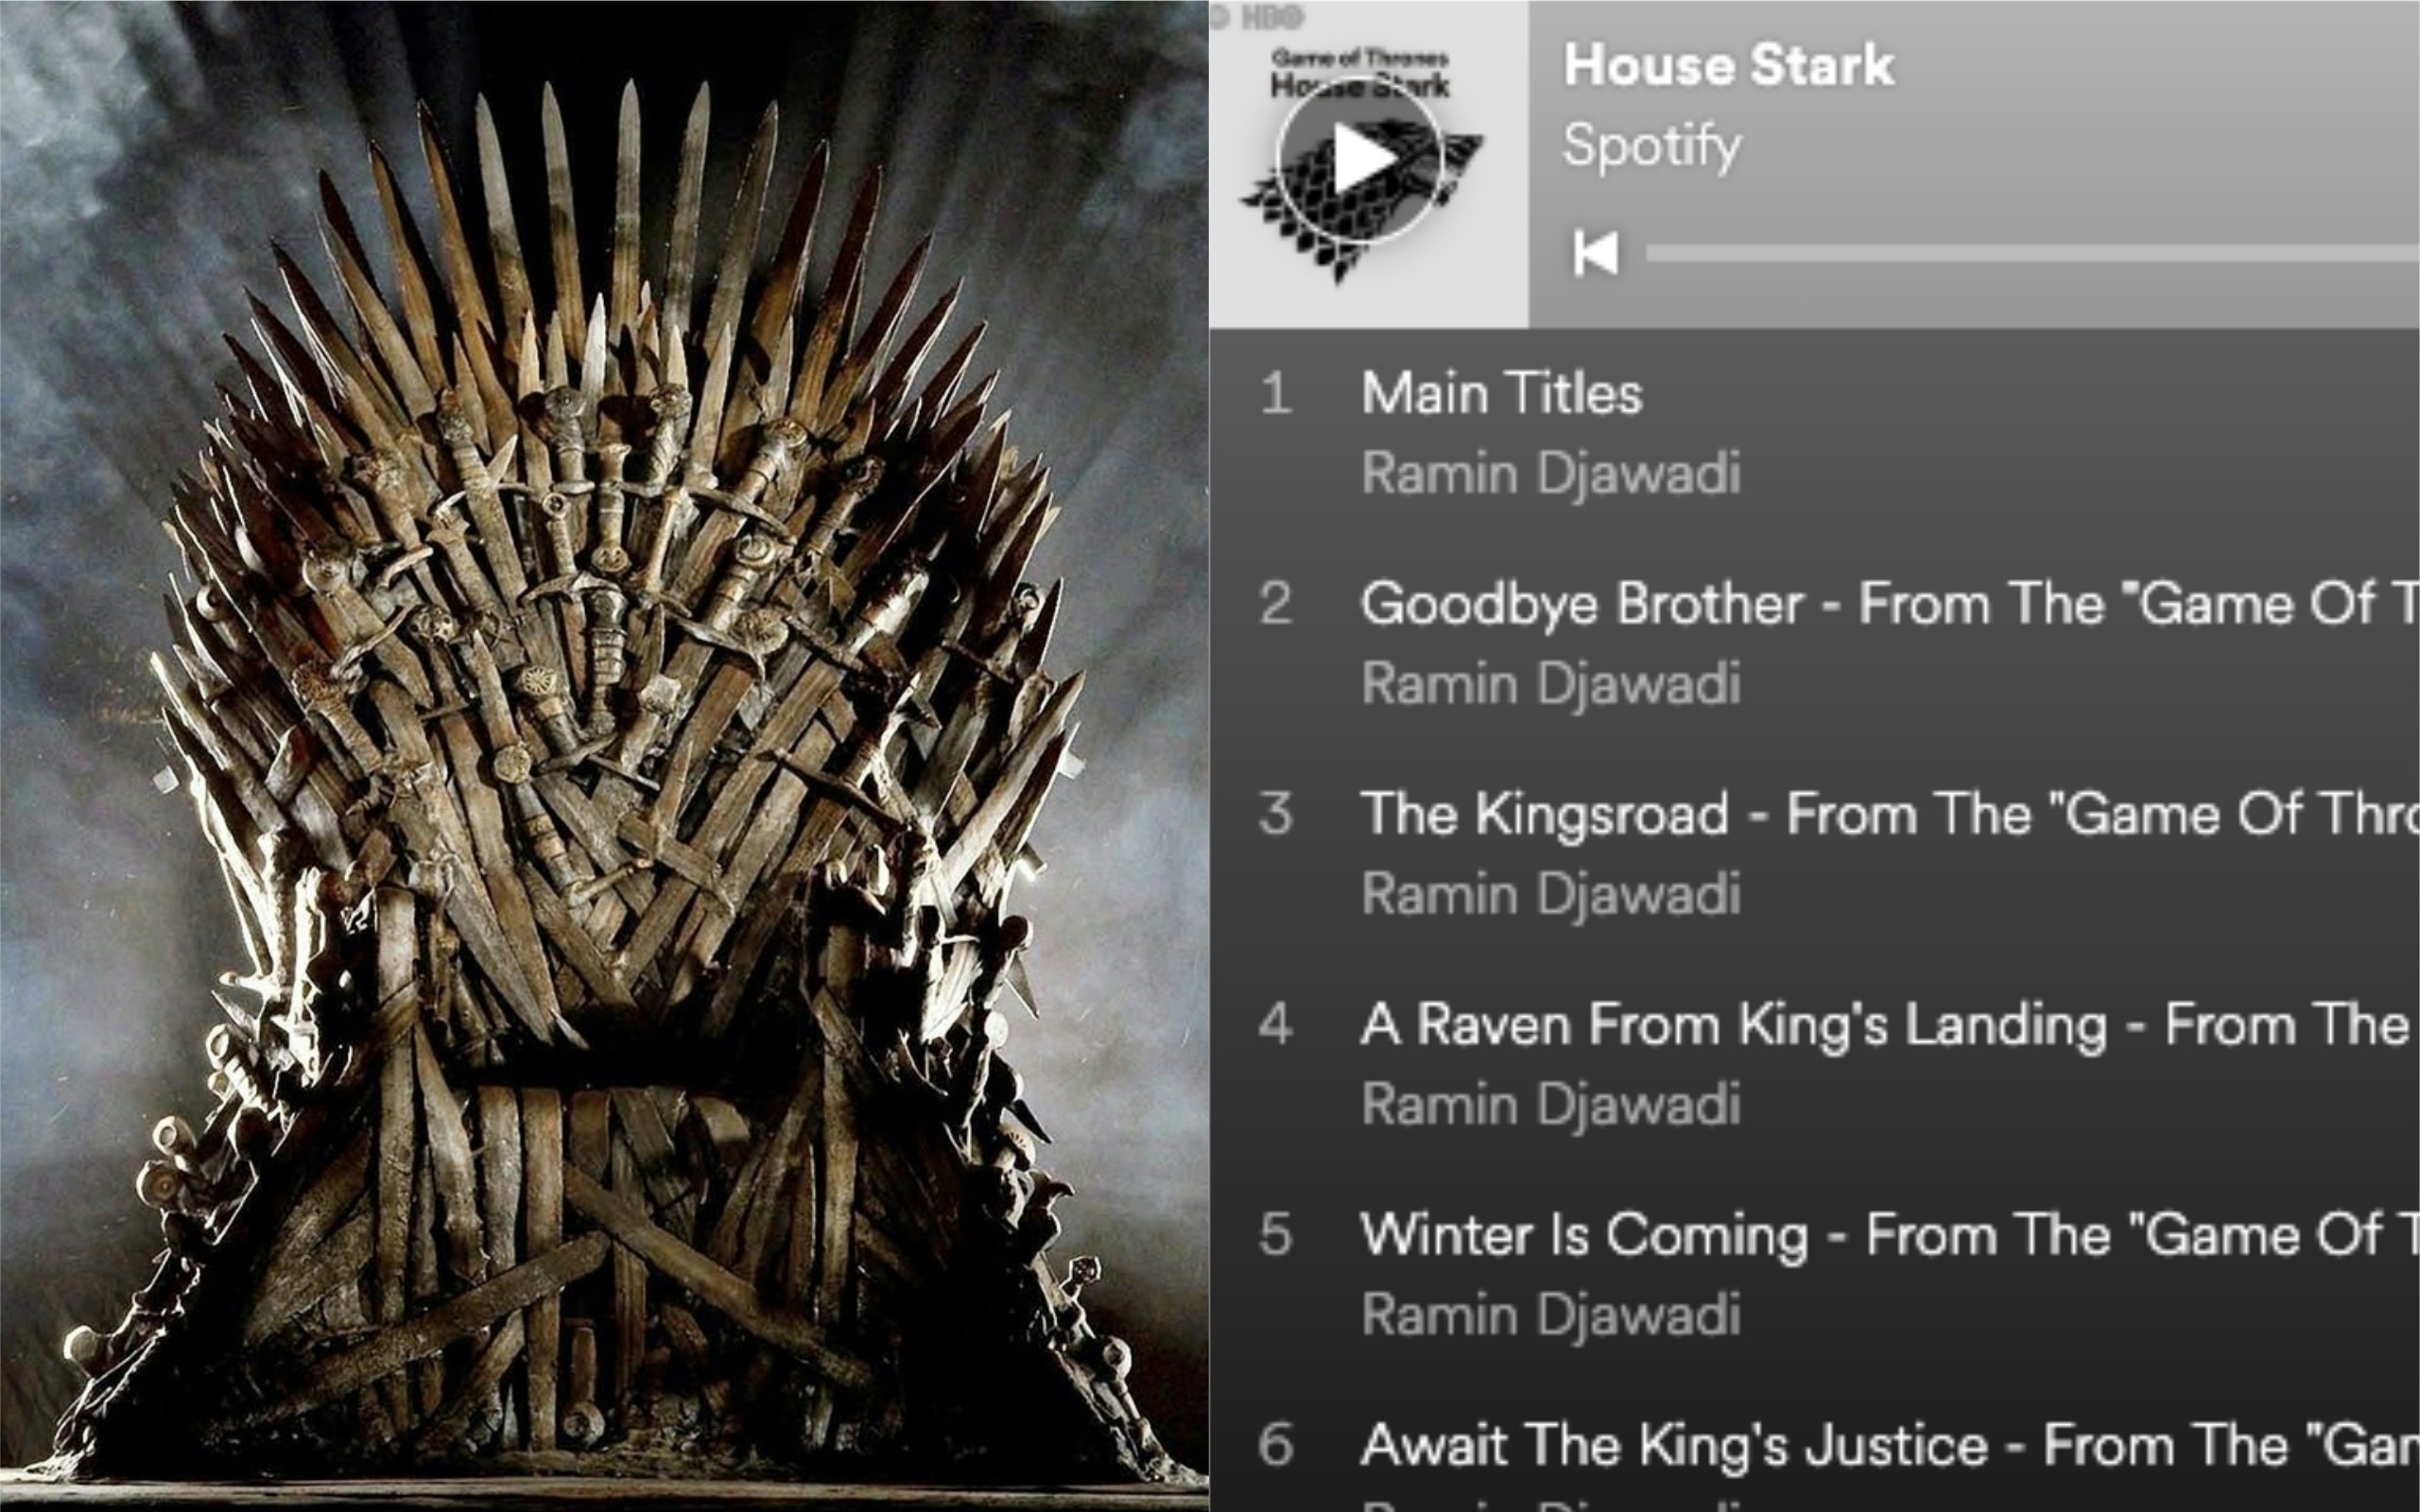 Spotifys Game Of Thrones Playlists For Different Houses